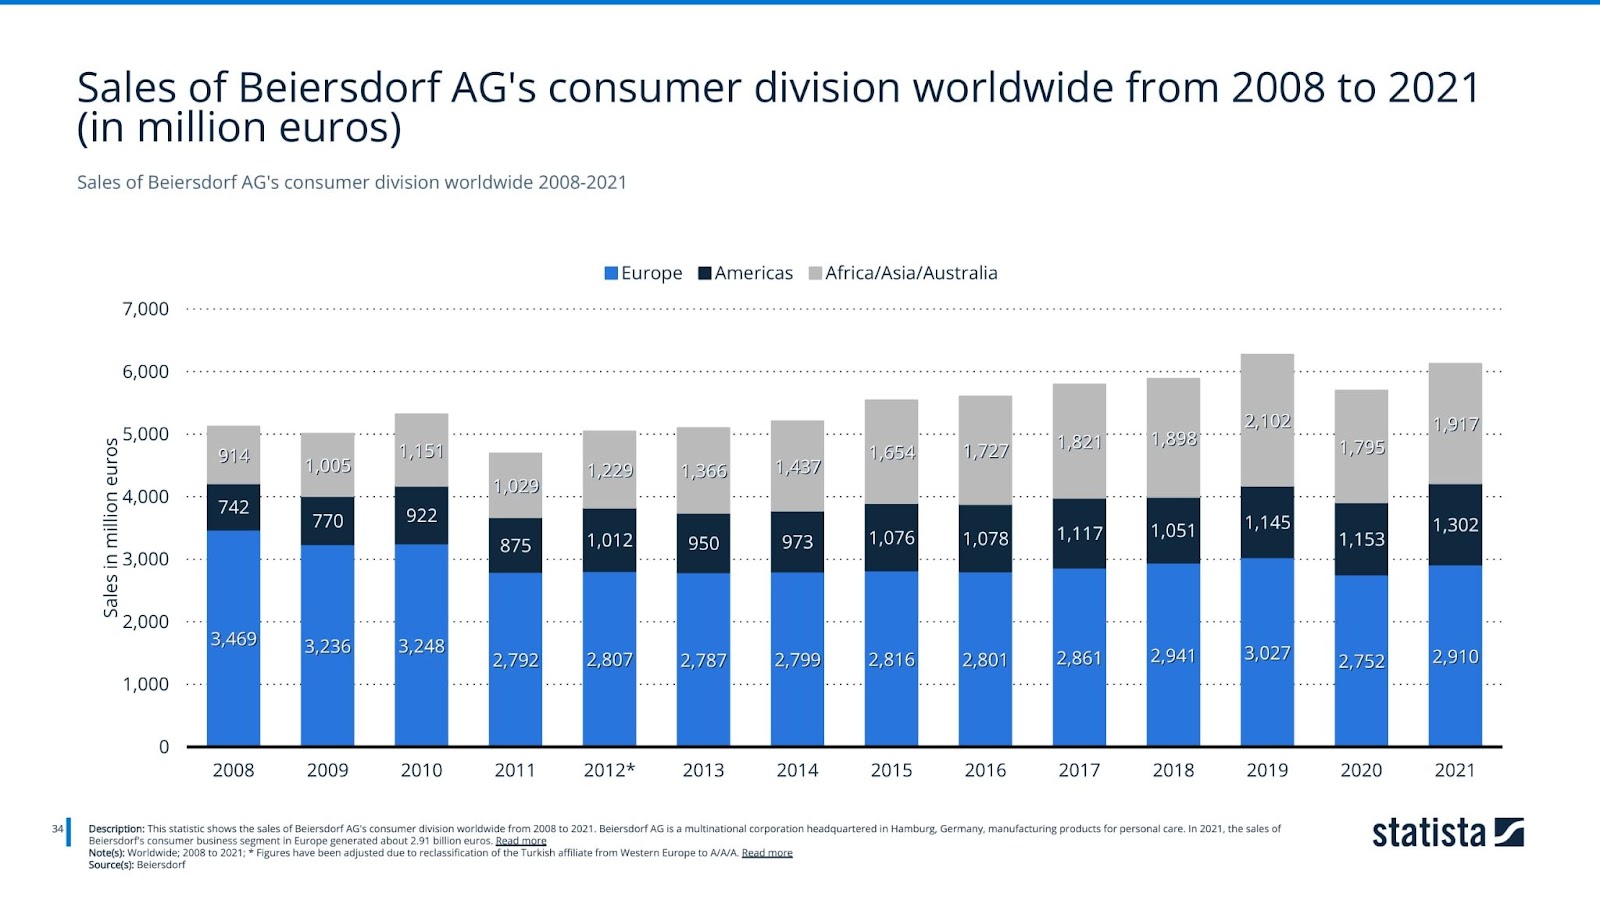 Sales of Beiersdorf AG's consumer division worldwide 2008-2021